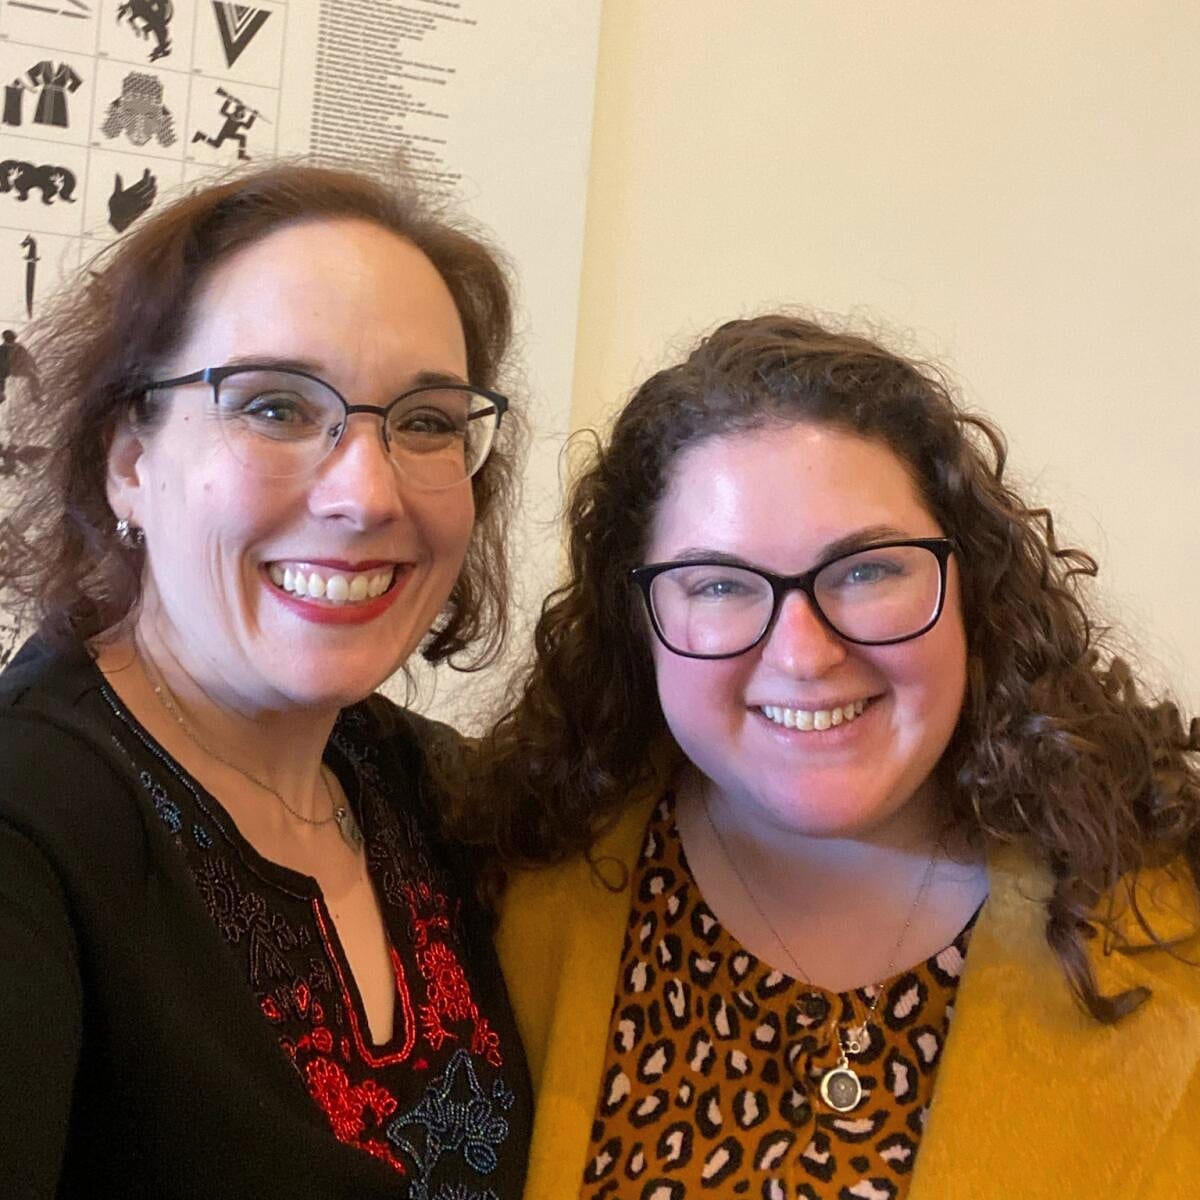 Audrey (a white woman in her 40s with dark red short hair and glasses) and Sarah (a white woman in her 30s with curly brown hair and glasses) stand close together smiling at the camera.